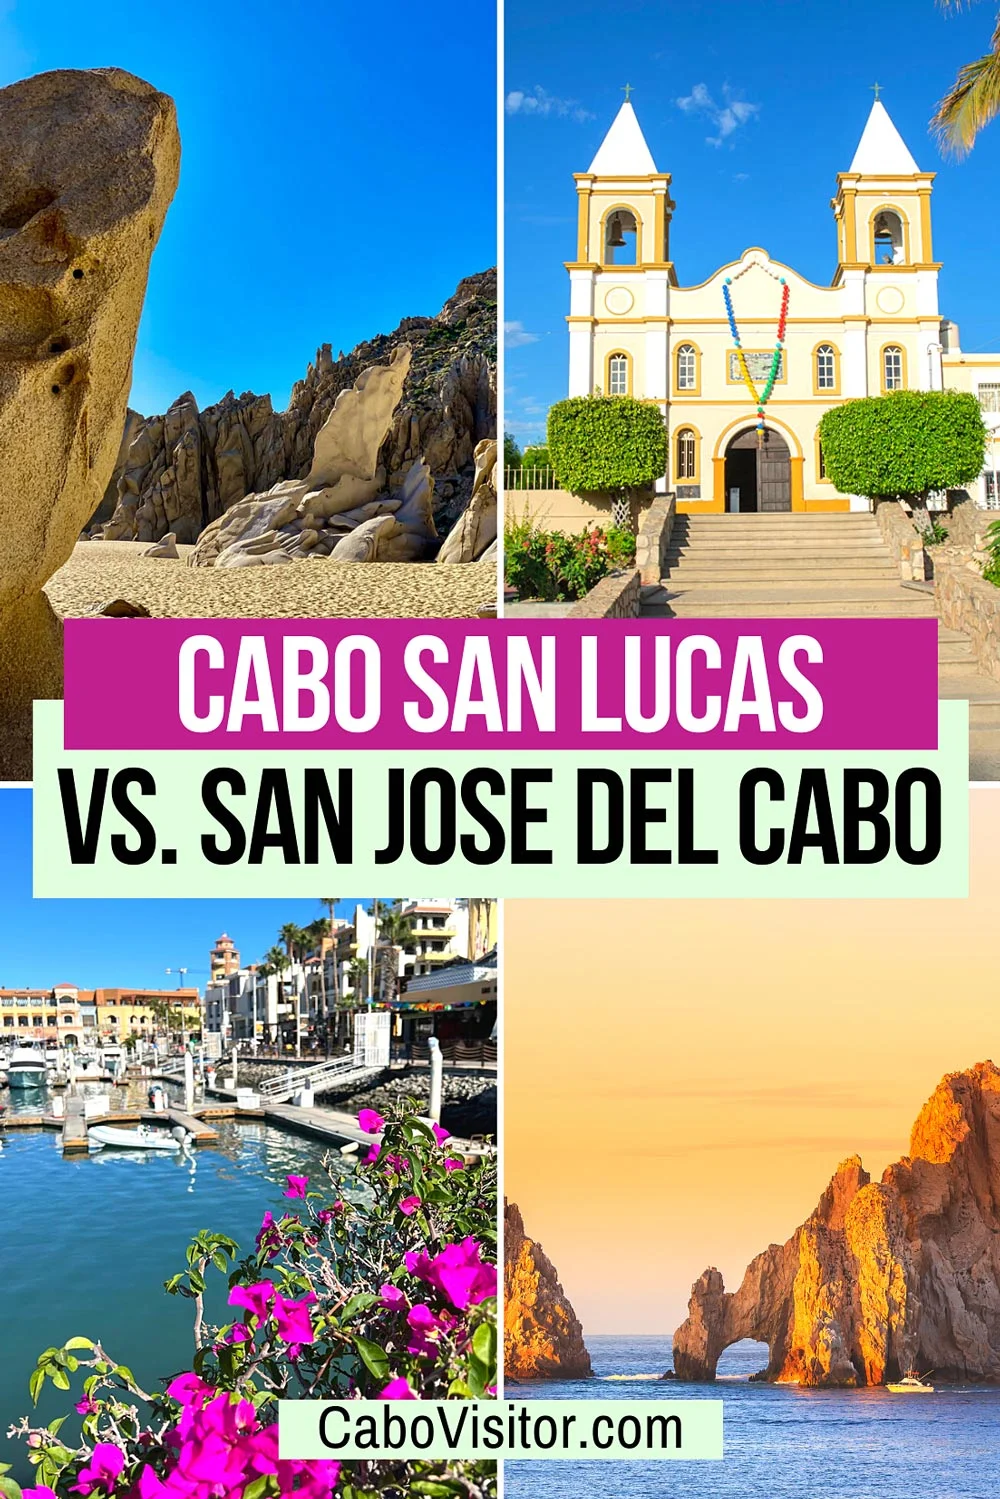 Which is better: Cabo San Lucas or San Jose del Cabo?